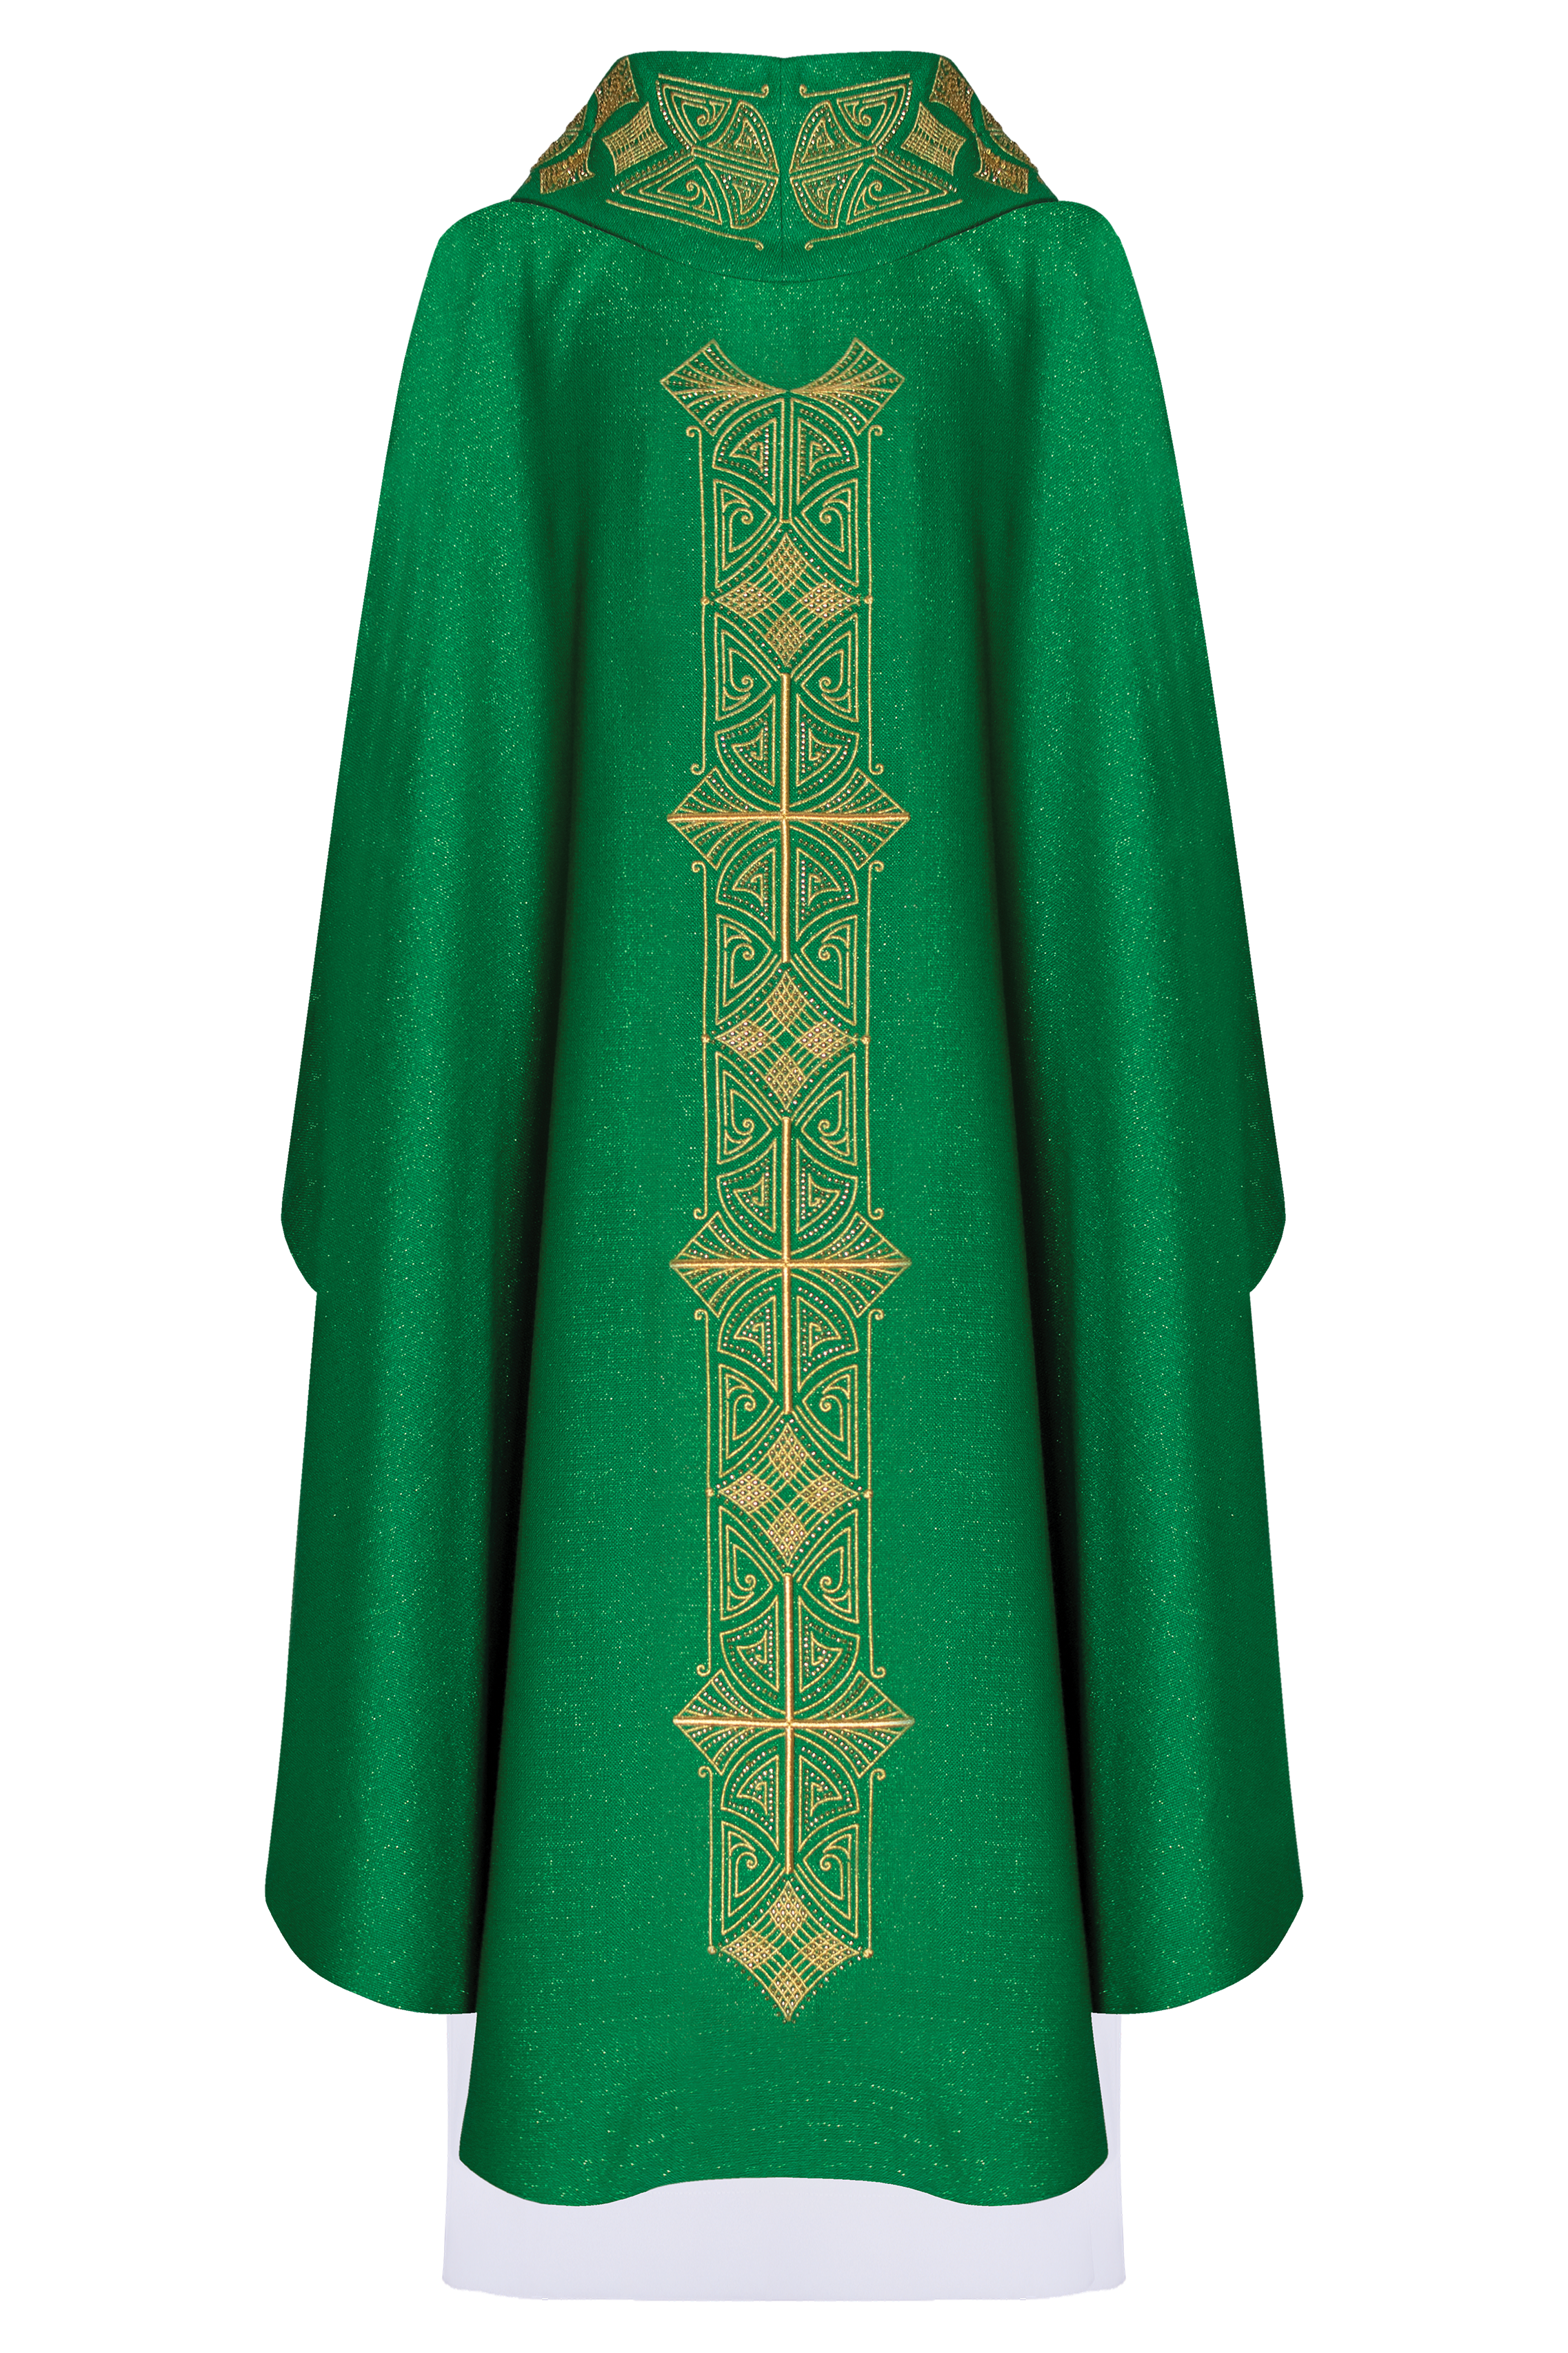 Green chasuble richly embroidered glossy